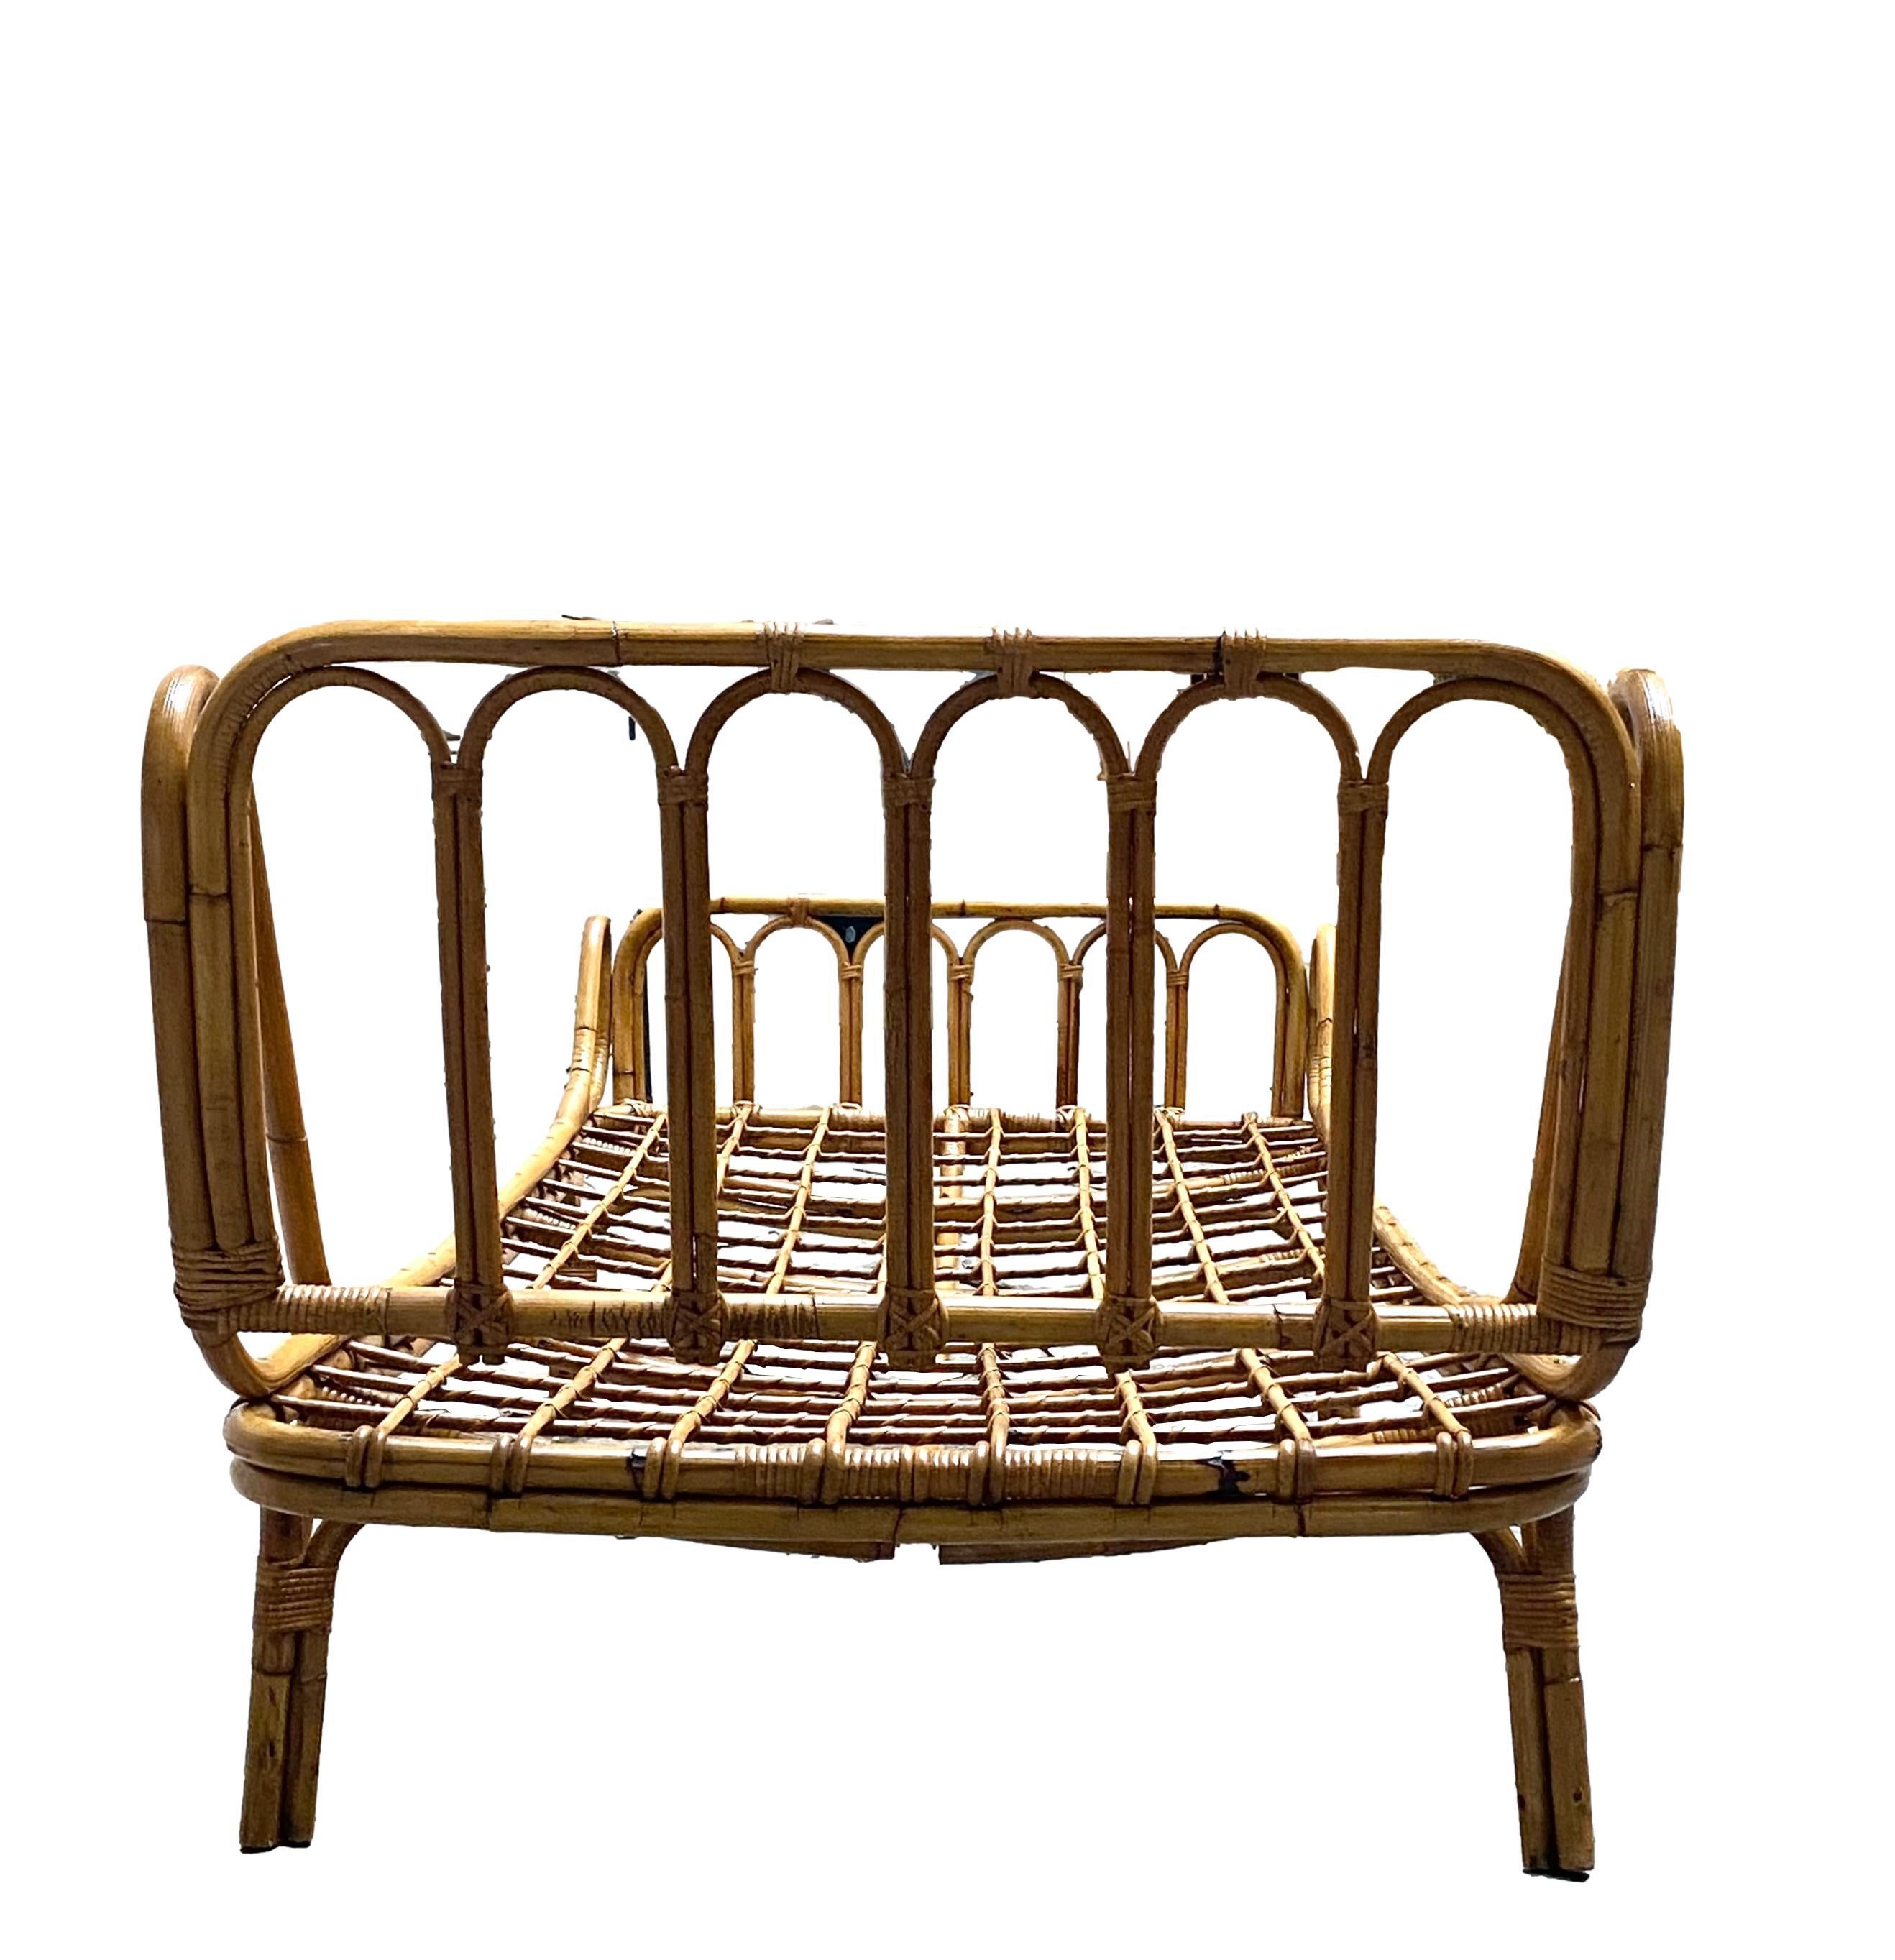 Italian rattan daybed in the style of Franco Albini and Franca Helg, circa 1960's. Long rattan bed with slatted sides and wrapped rattan detailing. Rattan is in good original vintage condition.